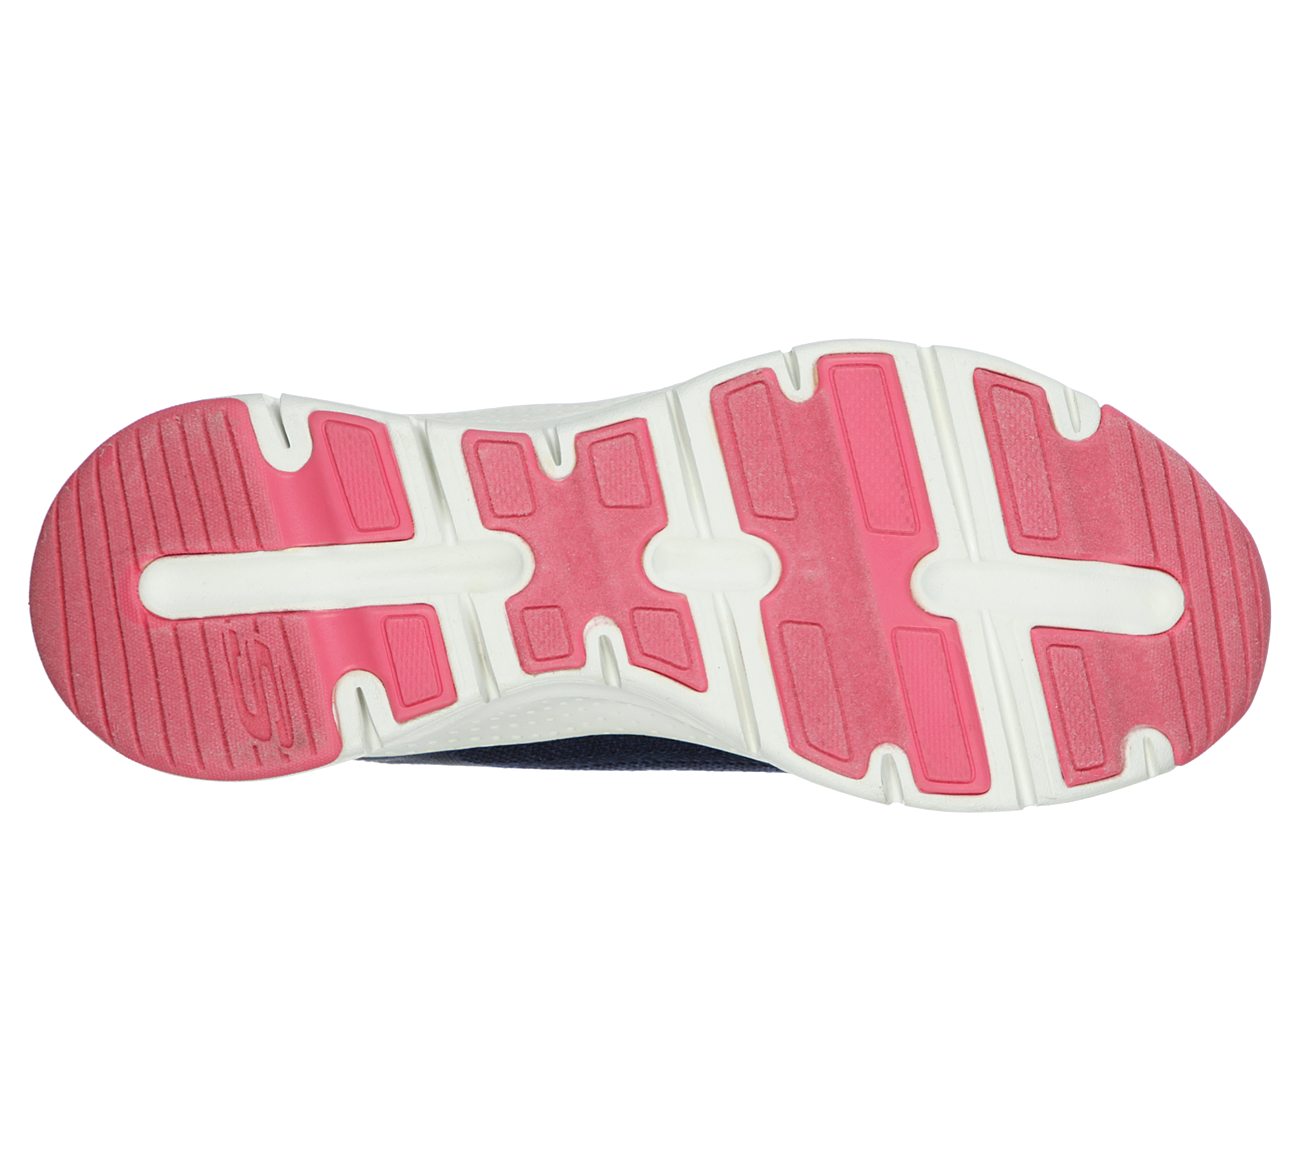 ARCH FIT-COMFY WAVE, NAVY/HOT PINK Footwear Bottom View